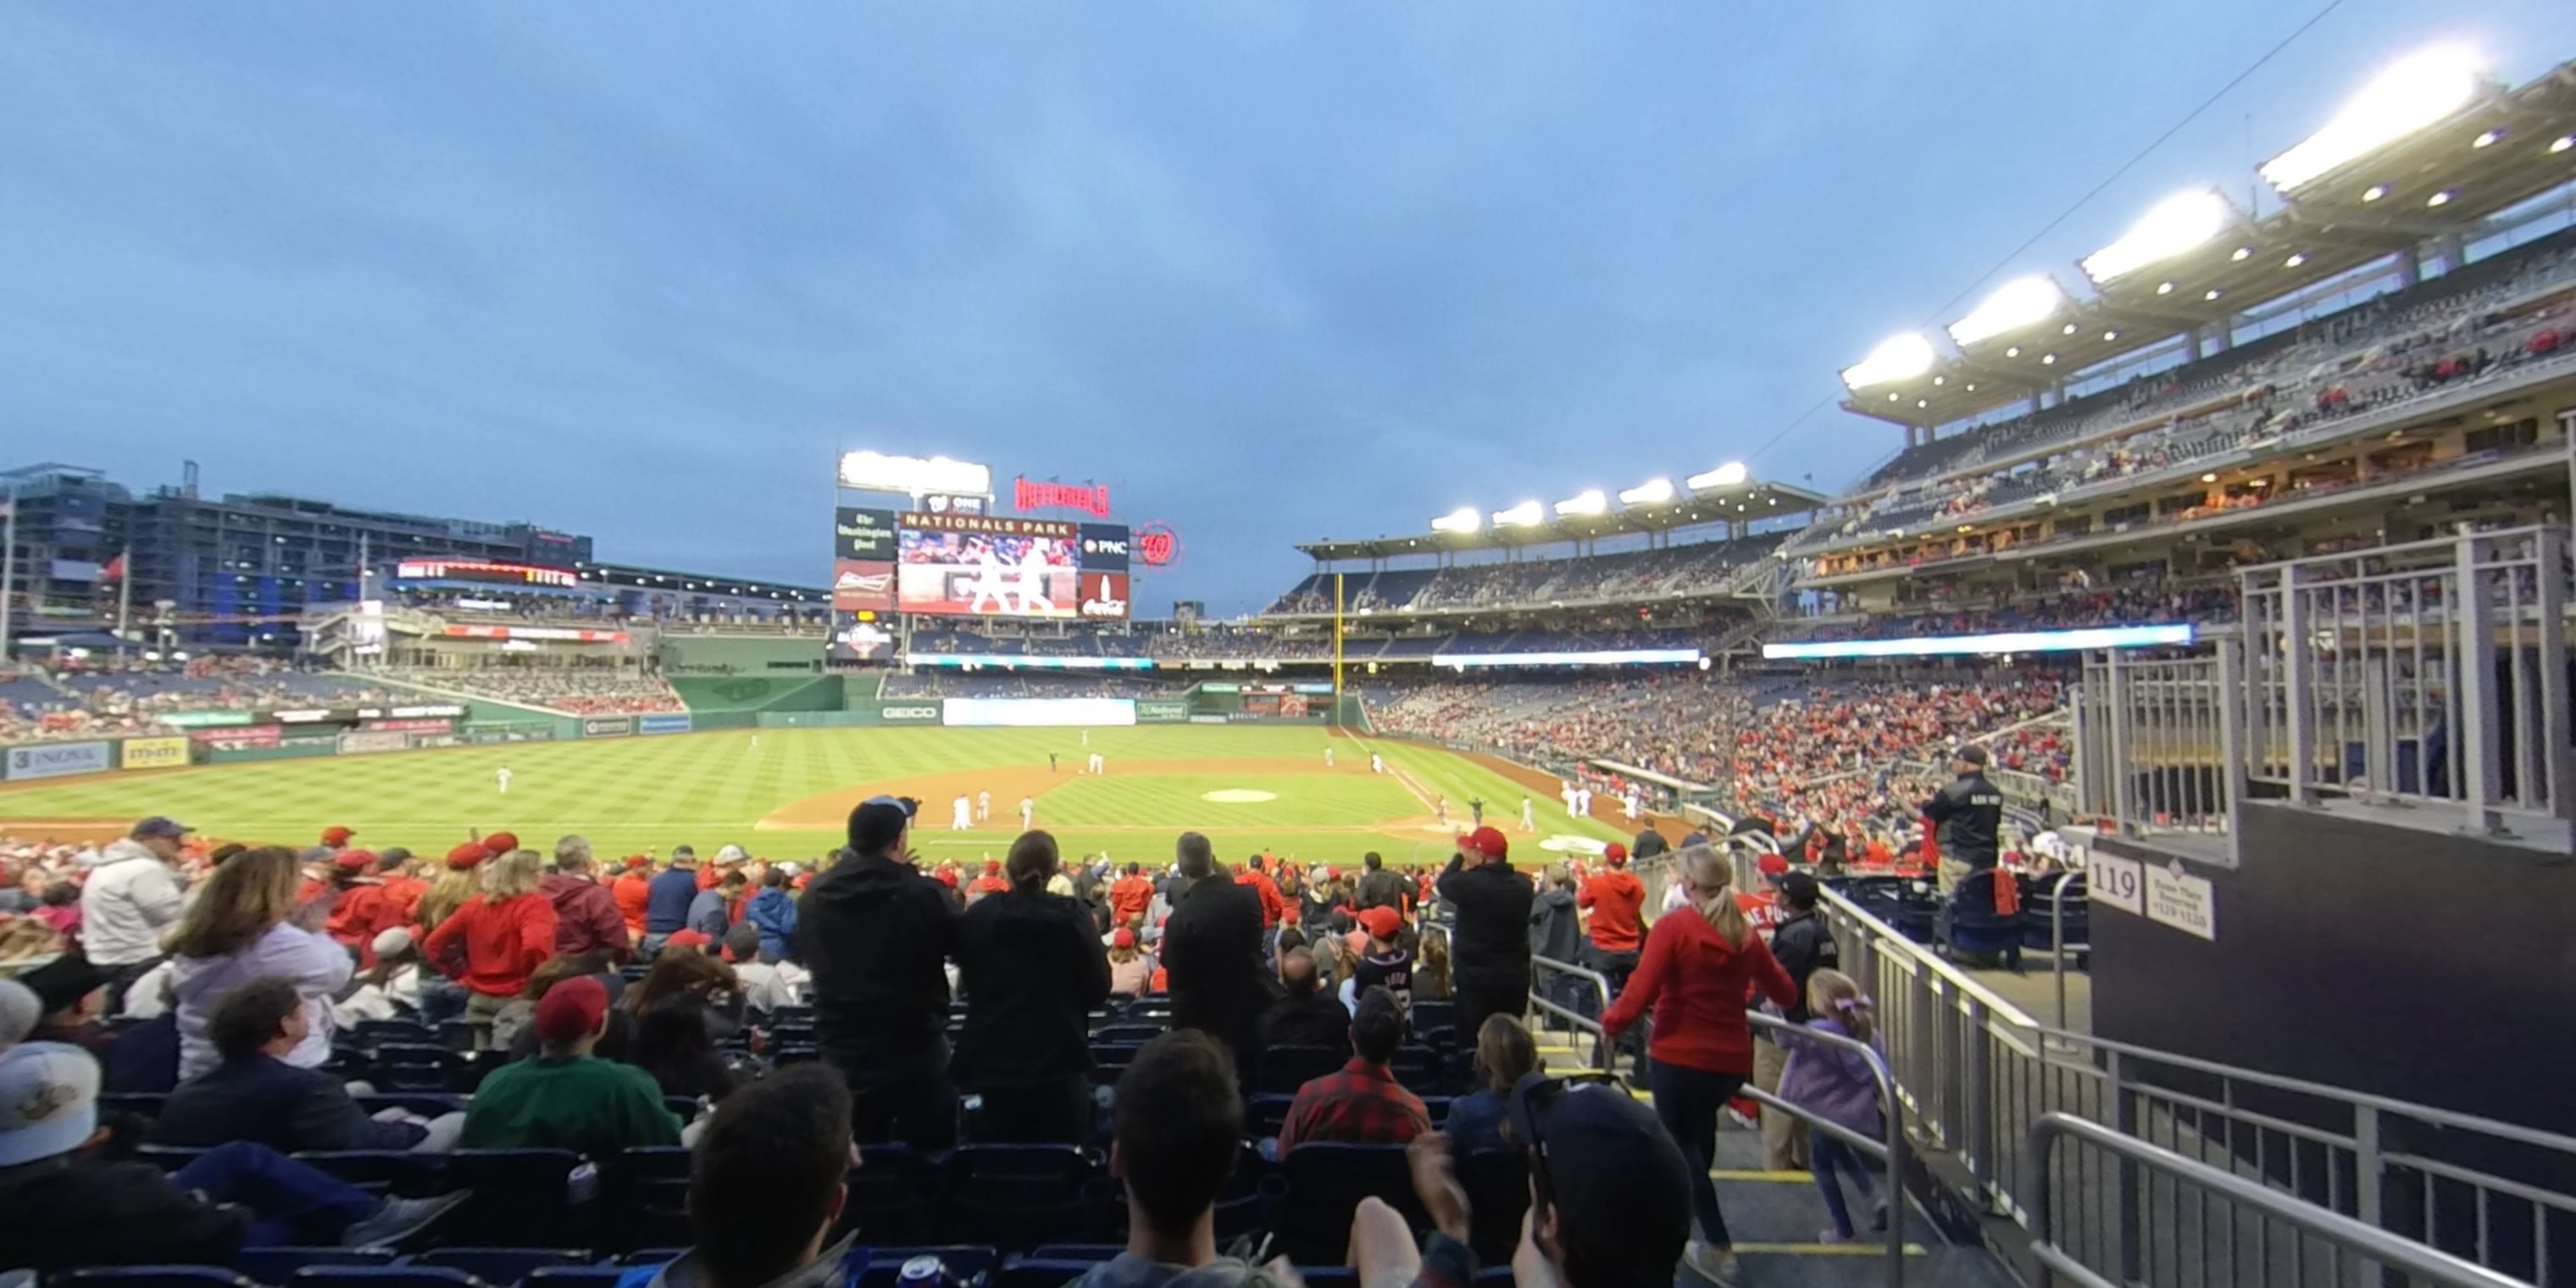 section 119 panoramic seat view  for baseball - nationals park